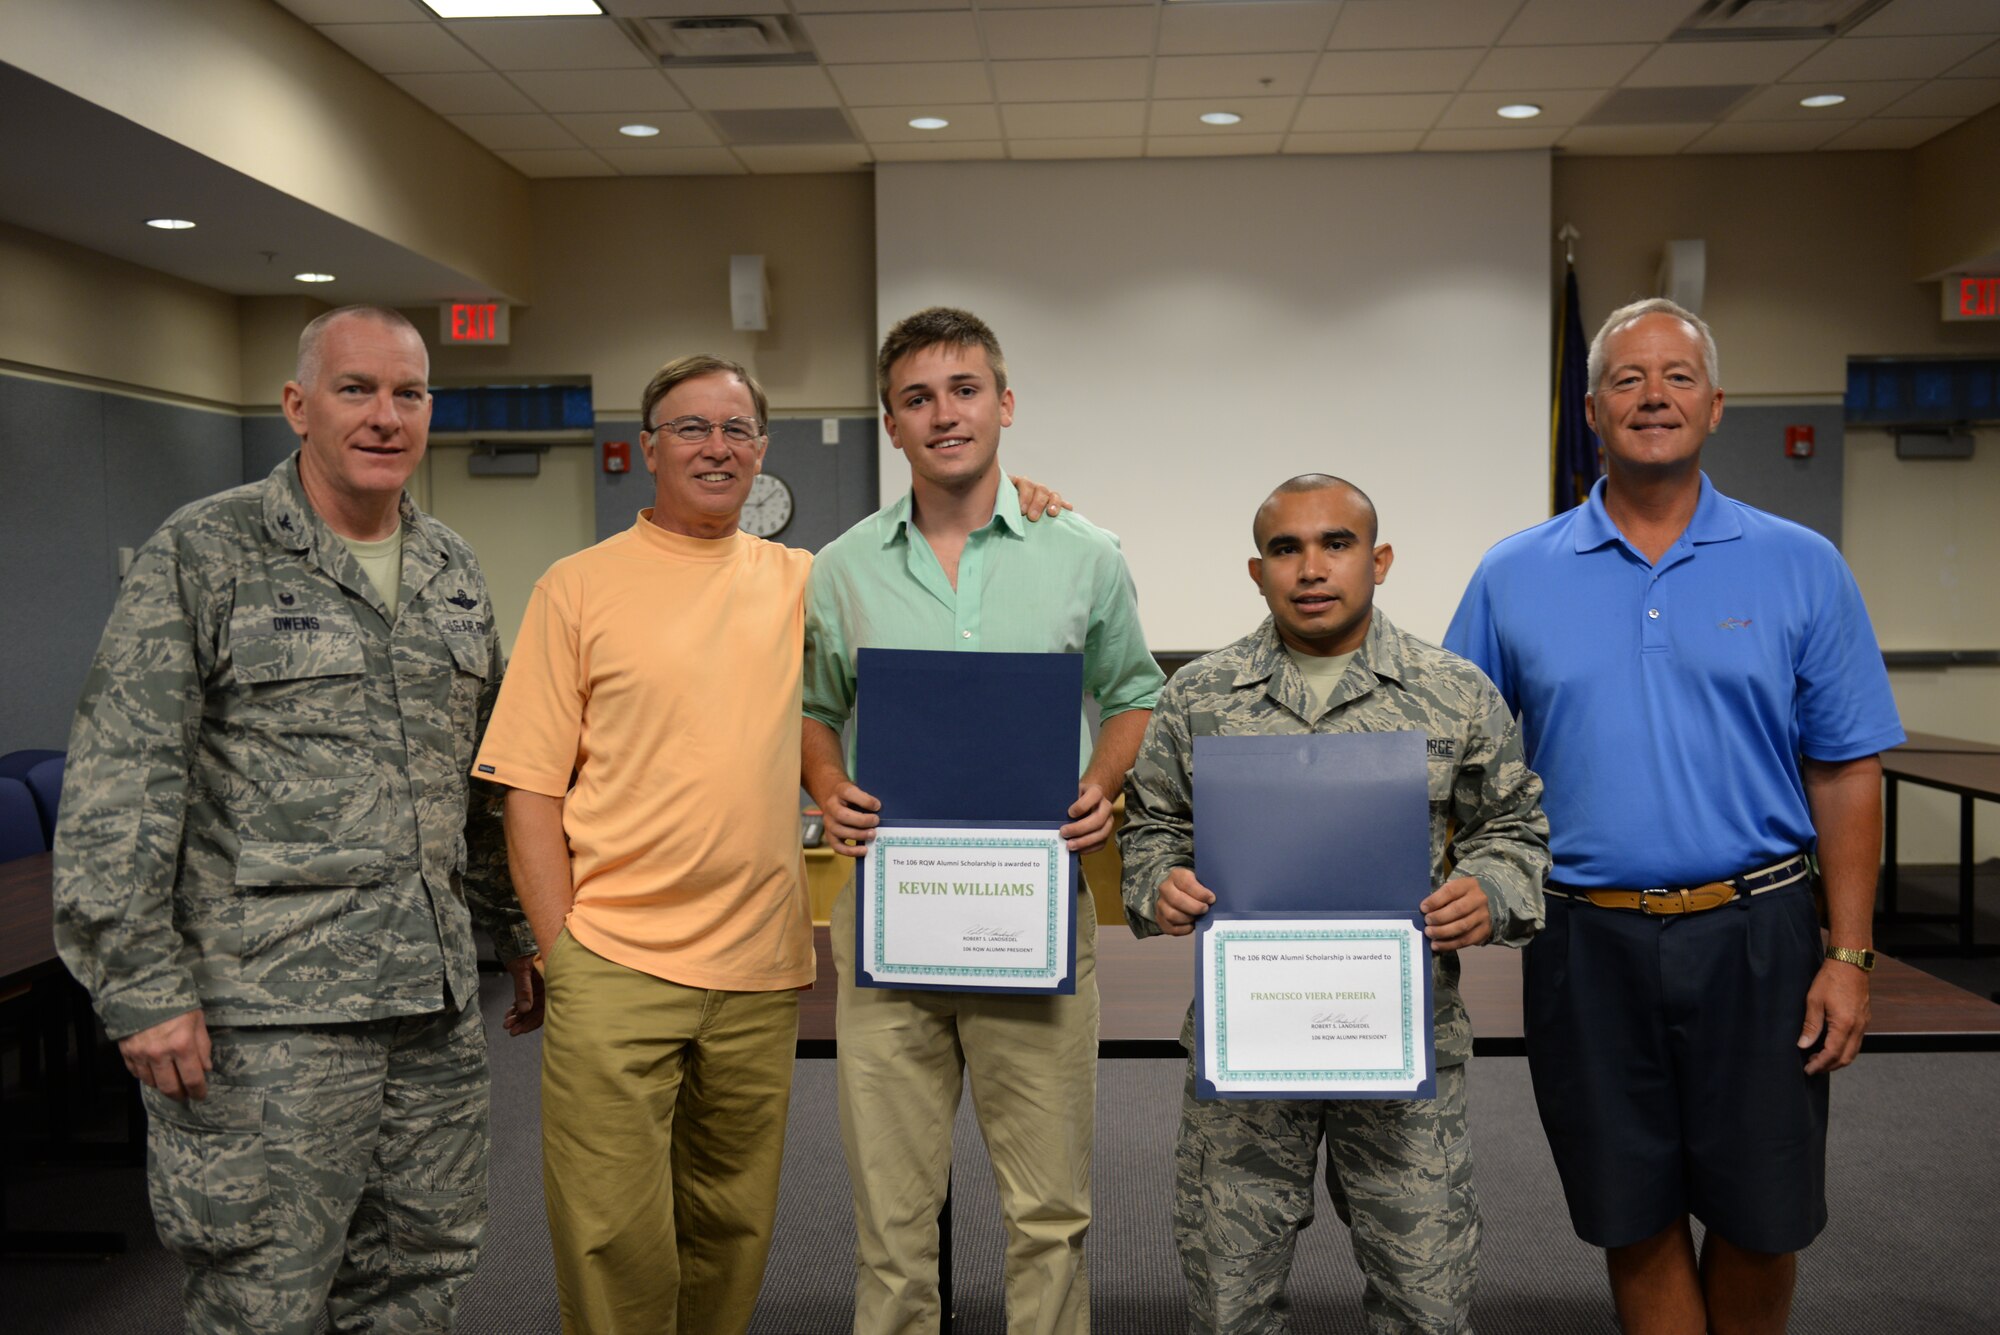 WESTHAMPTON BEACH, NY - Col Thomas J Owens and Col Robert Landsiedel (retired) awards Senior Airman Francisco Vierapereira, of the 106th Civil Engineering Squadron and Kevin William, son of MSgt (Ret.) Don Williams the Alumni Association Scholarship at FS Gabreski ANG on August 05, 2015.